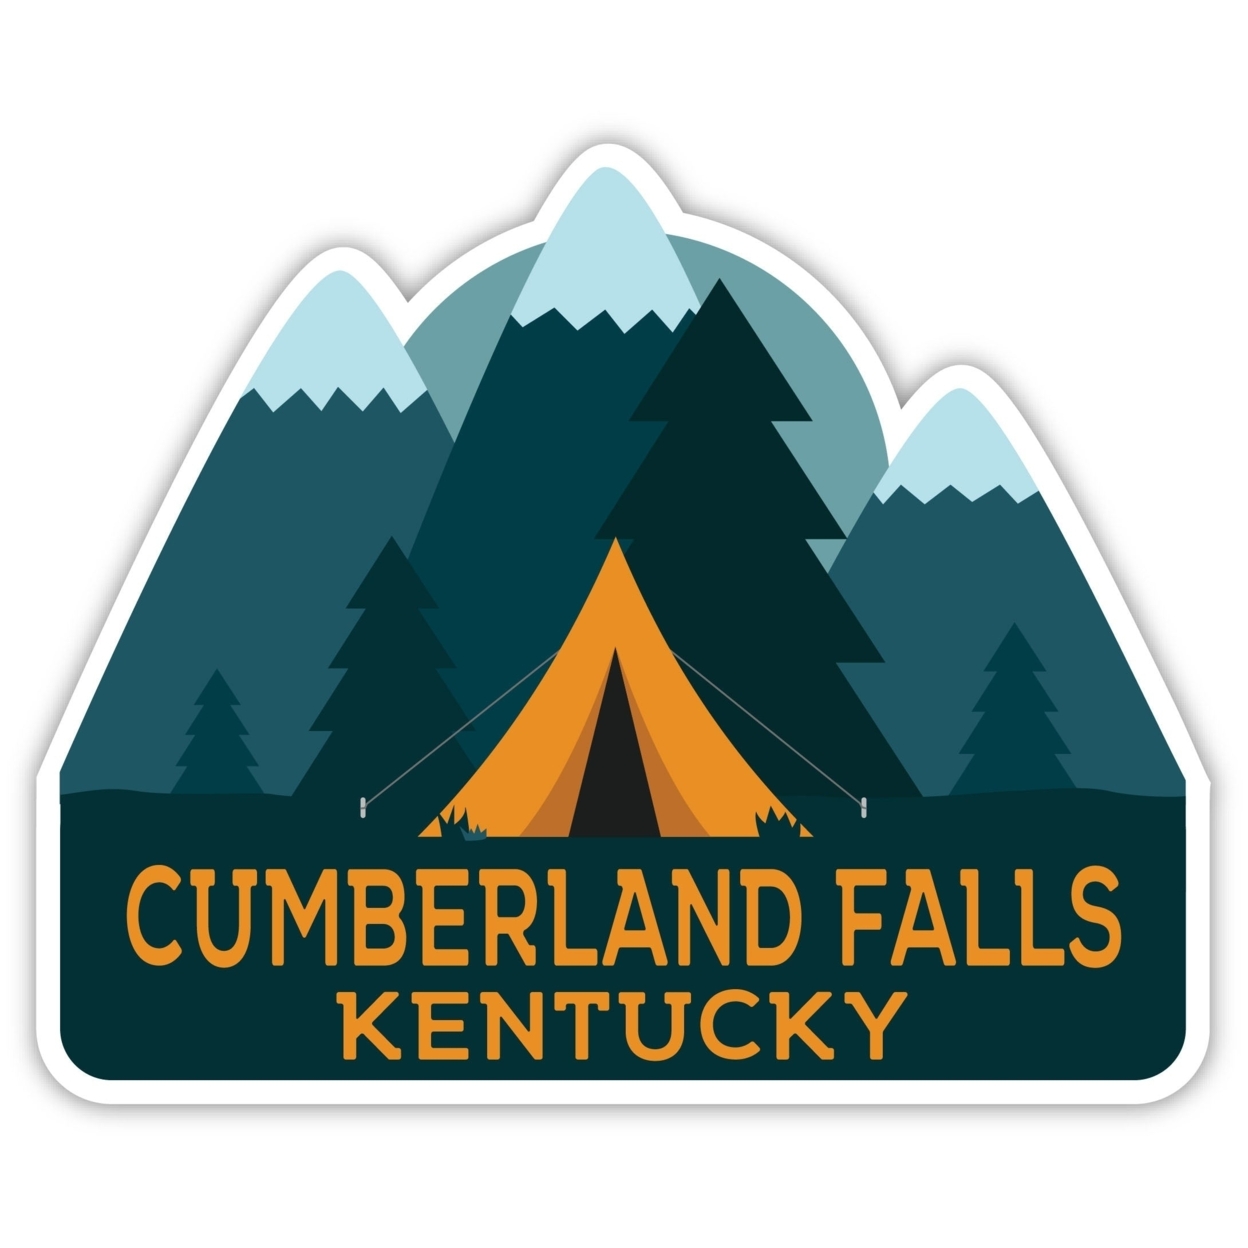 Cumberland Falls Kentucky Souvenir Decorative Stickers (Choose Theme And Size) - 4-Pack, 4-Inch, Tent